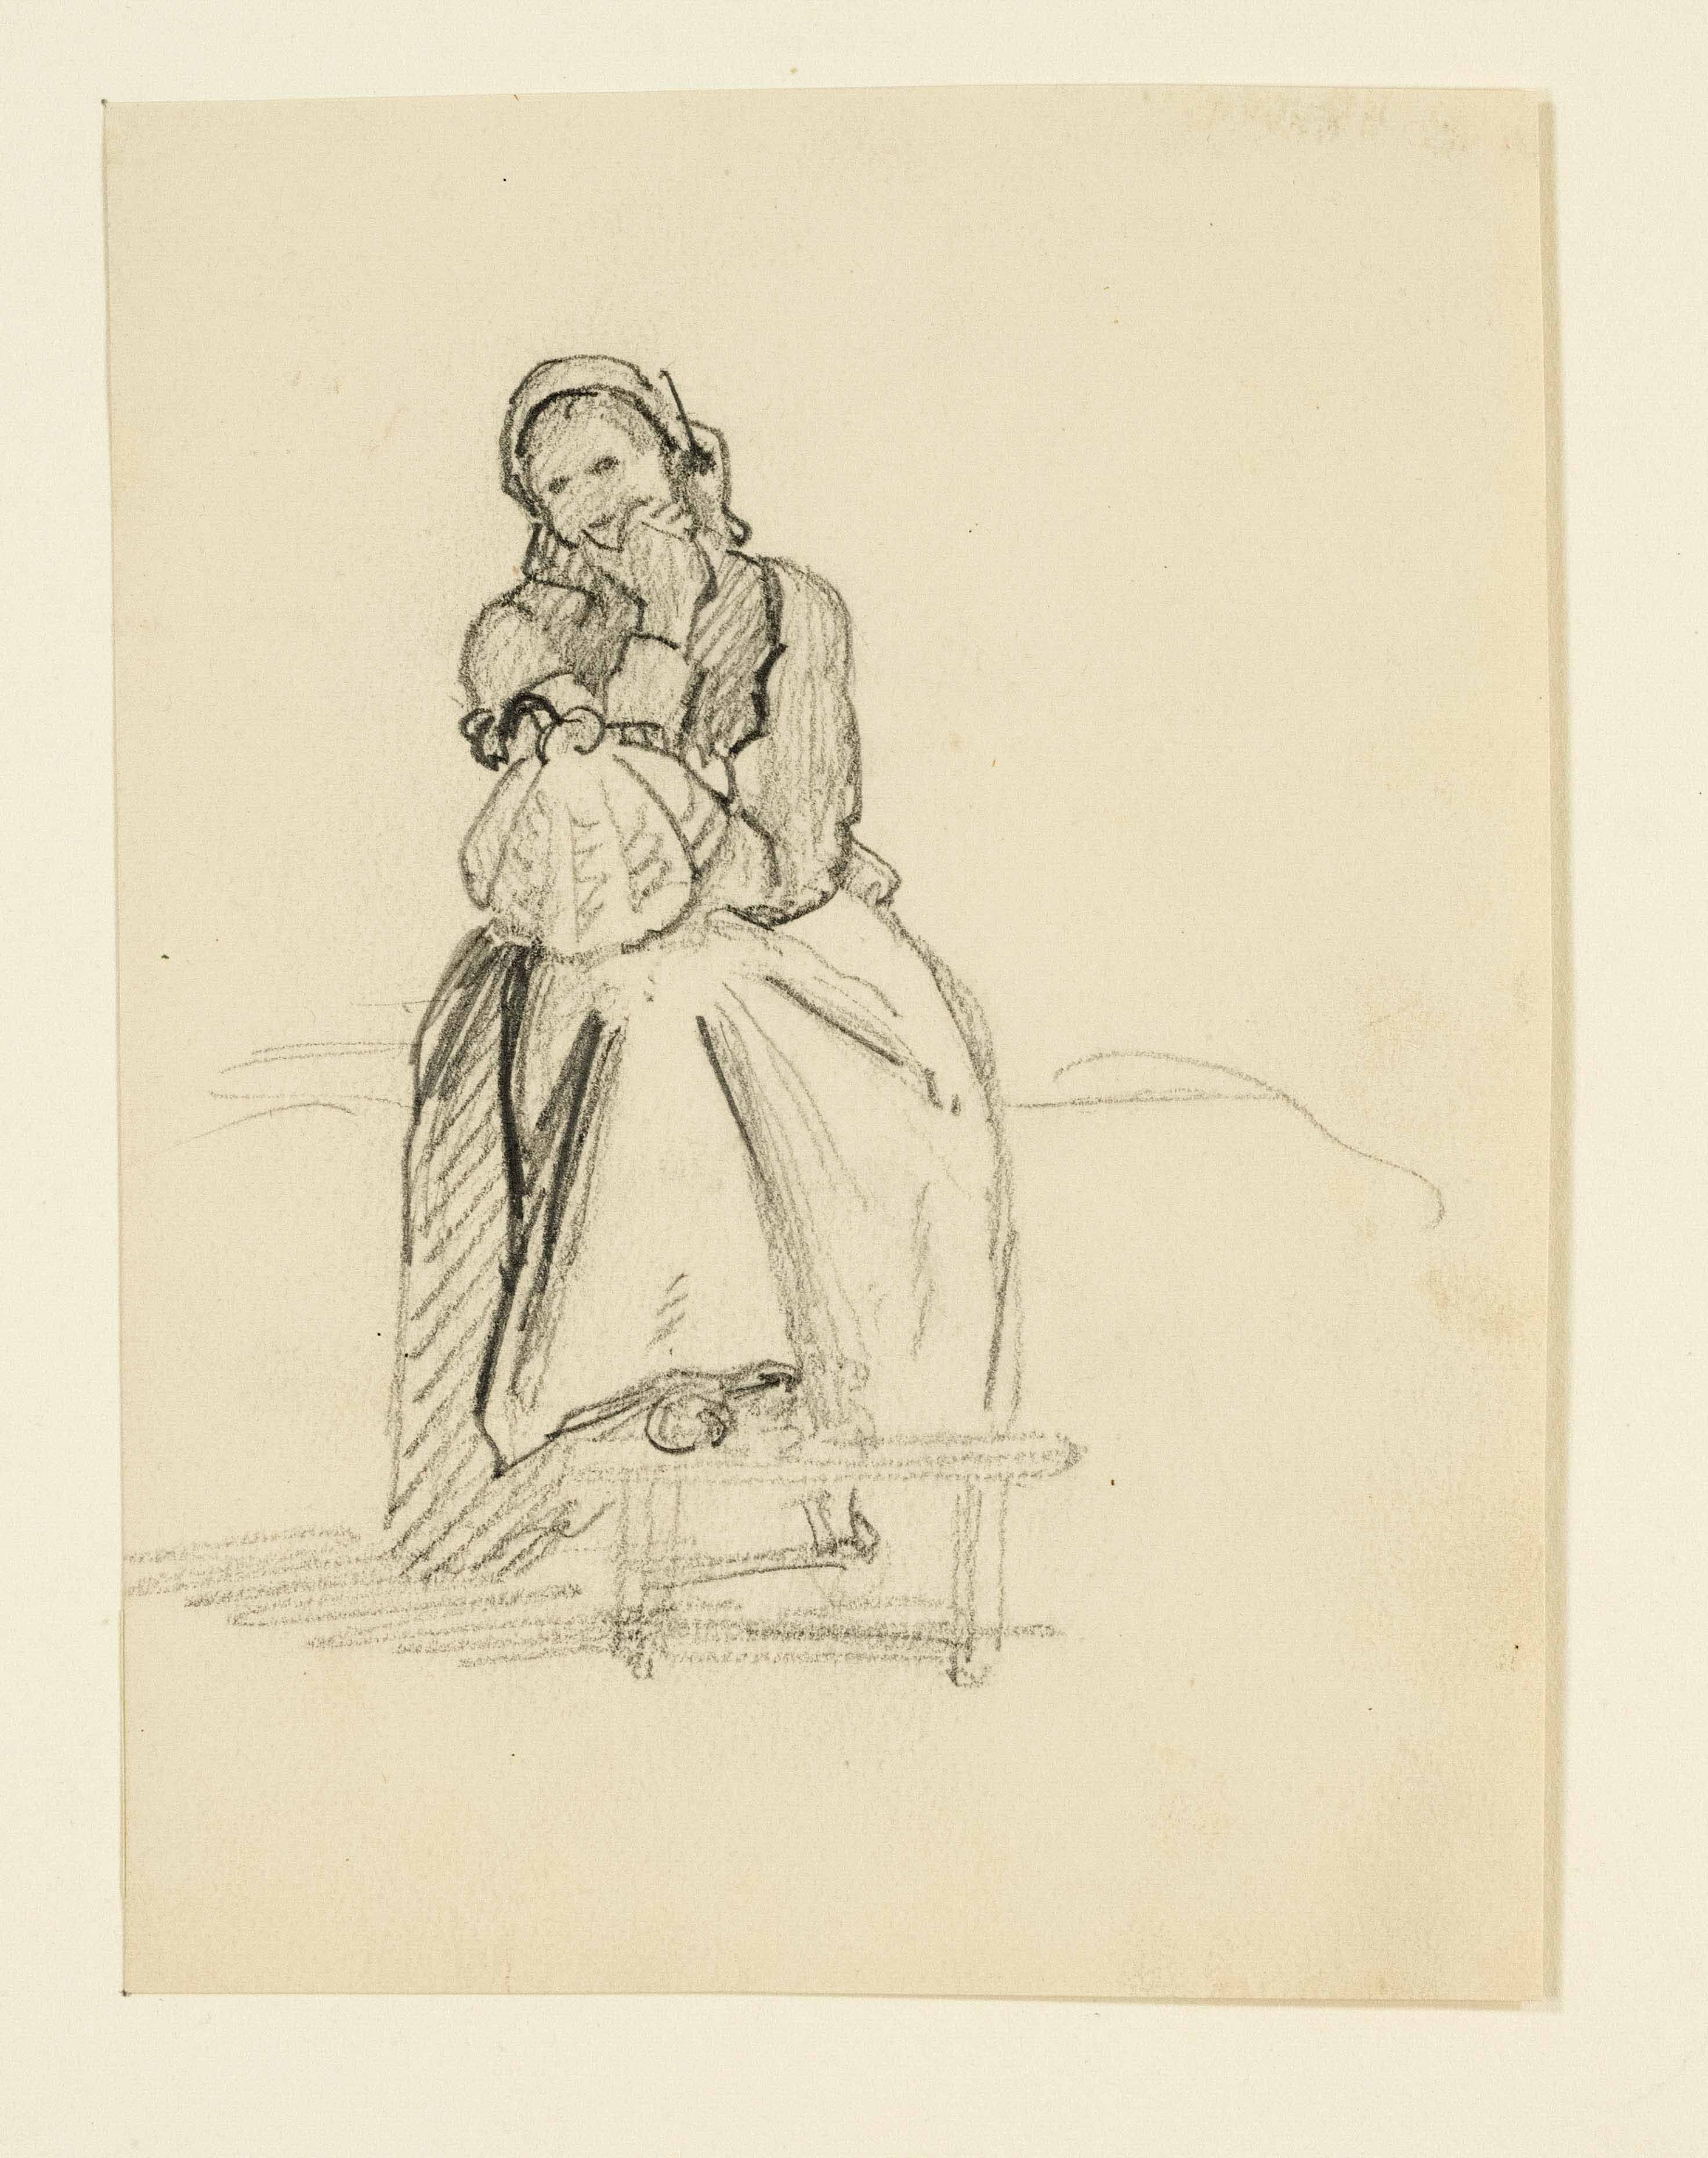 Group of 4 figurative drawings of the 19th century: Johann Georg Meyer von Bremen (1813-1886) ( - Image 4 of 4